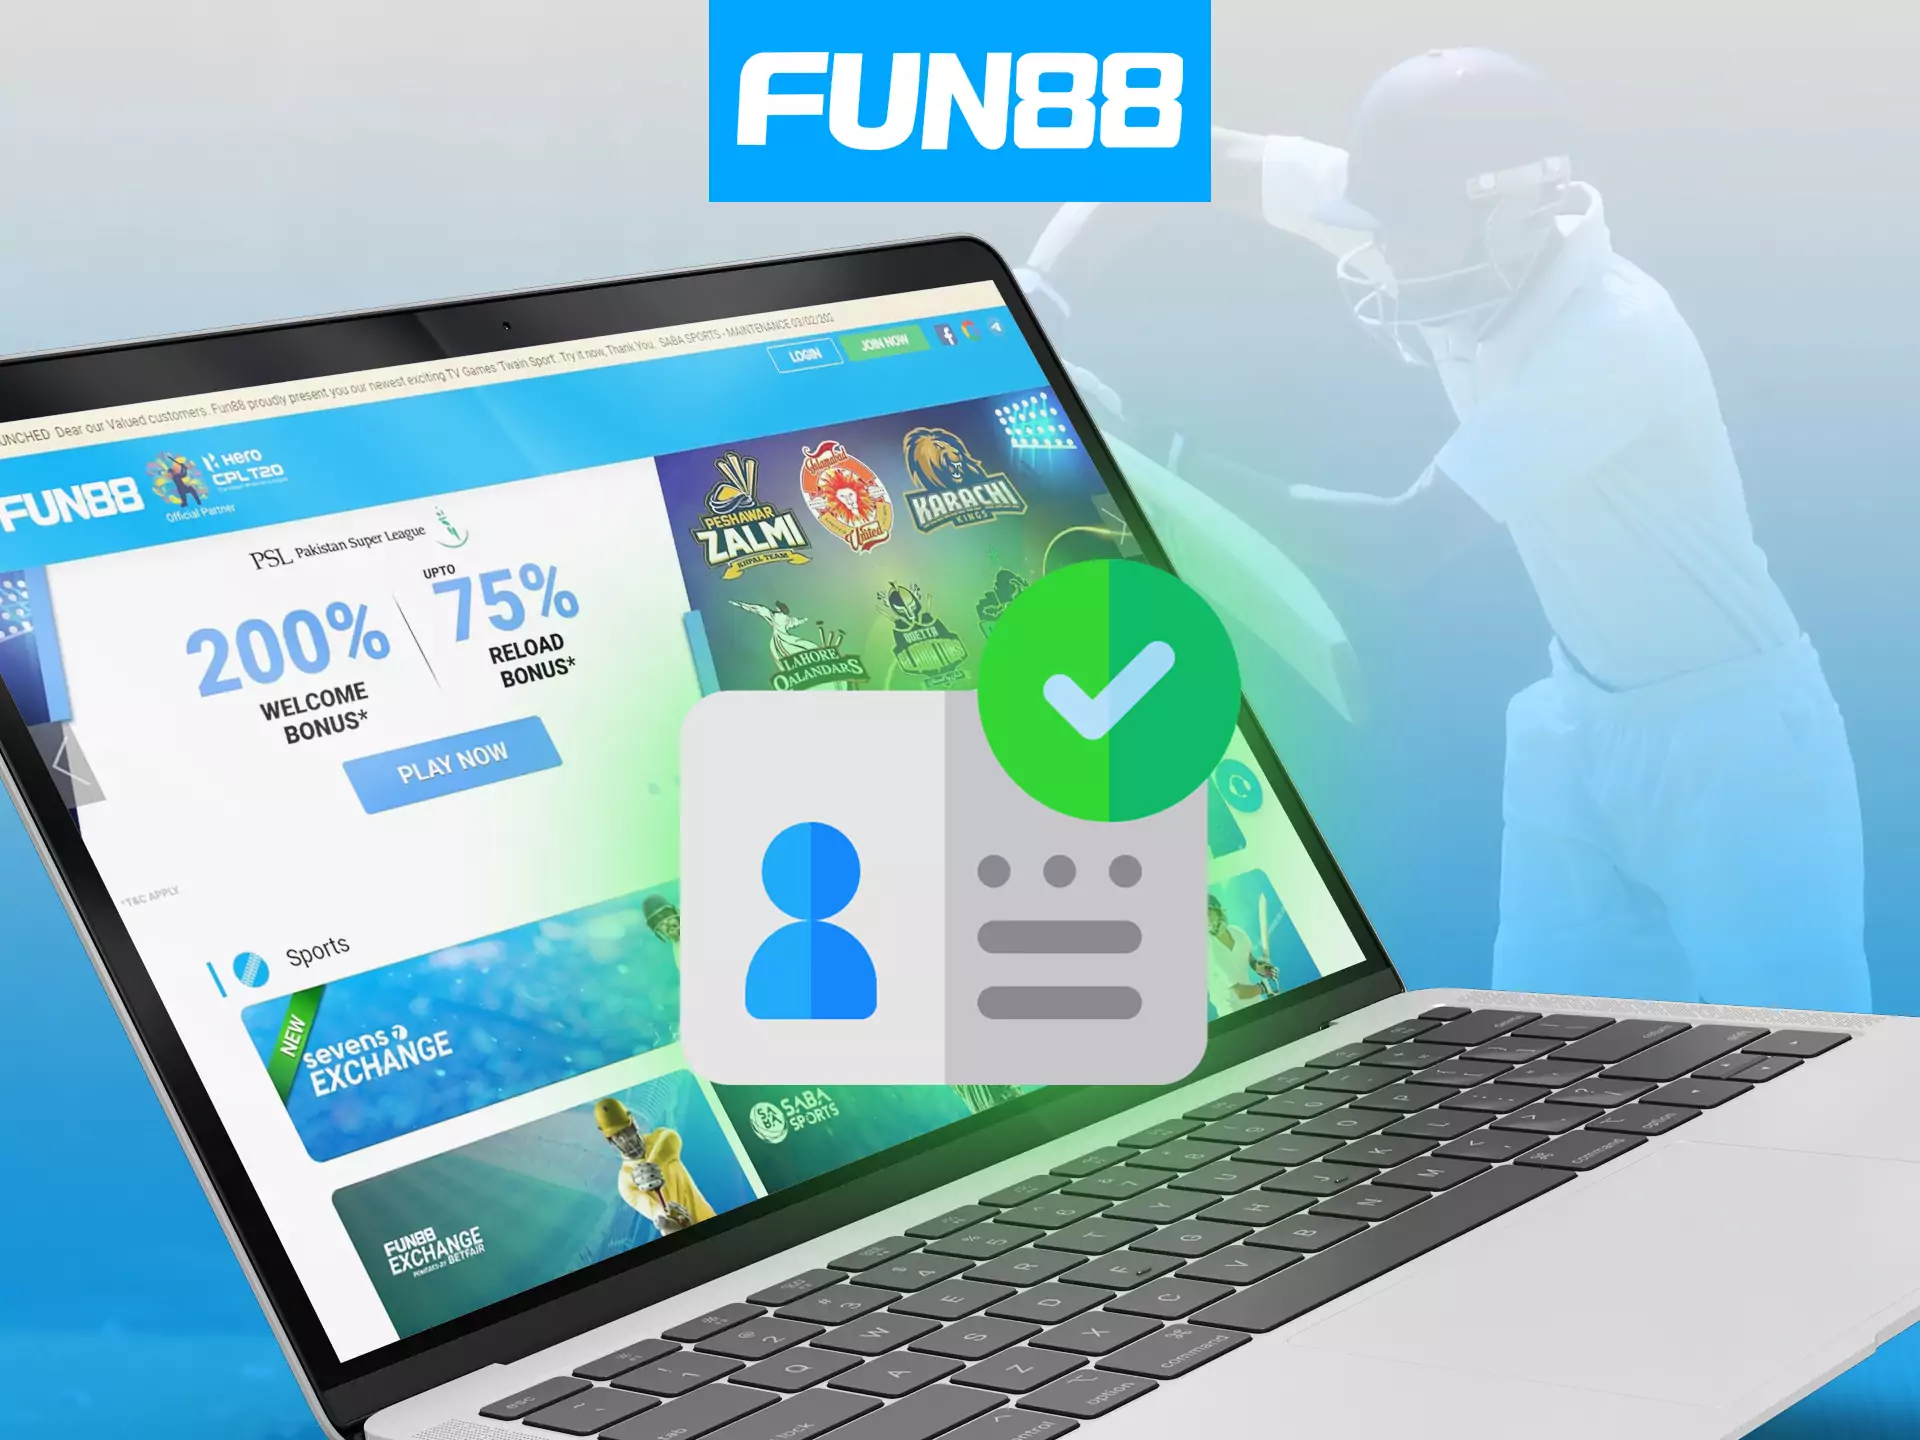 Complete a simple verification at Fun88 to get access to all features and benefits.